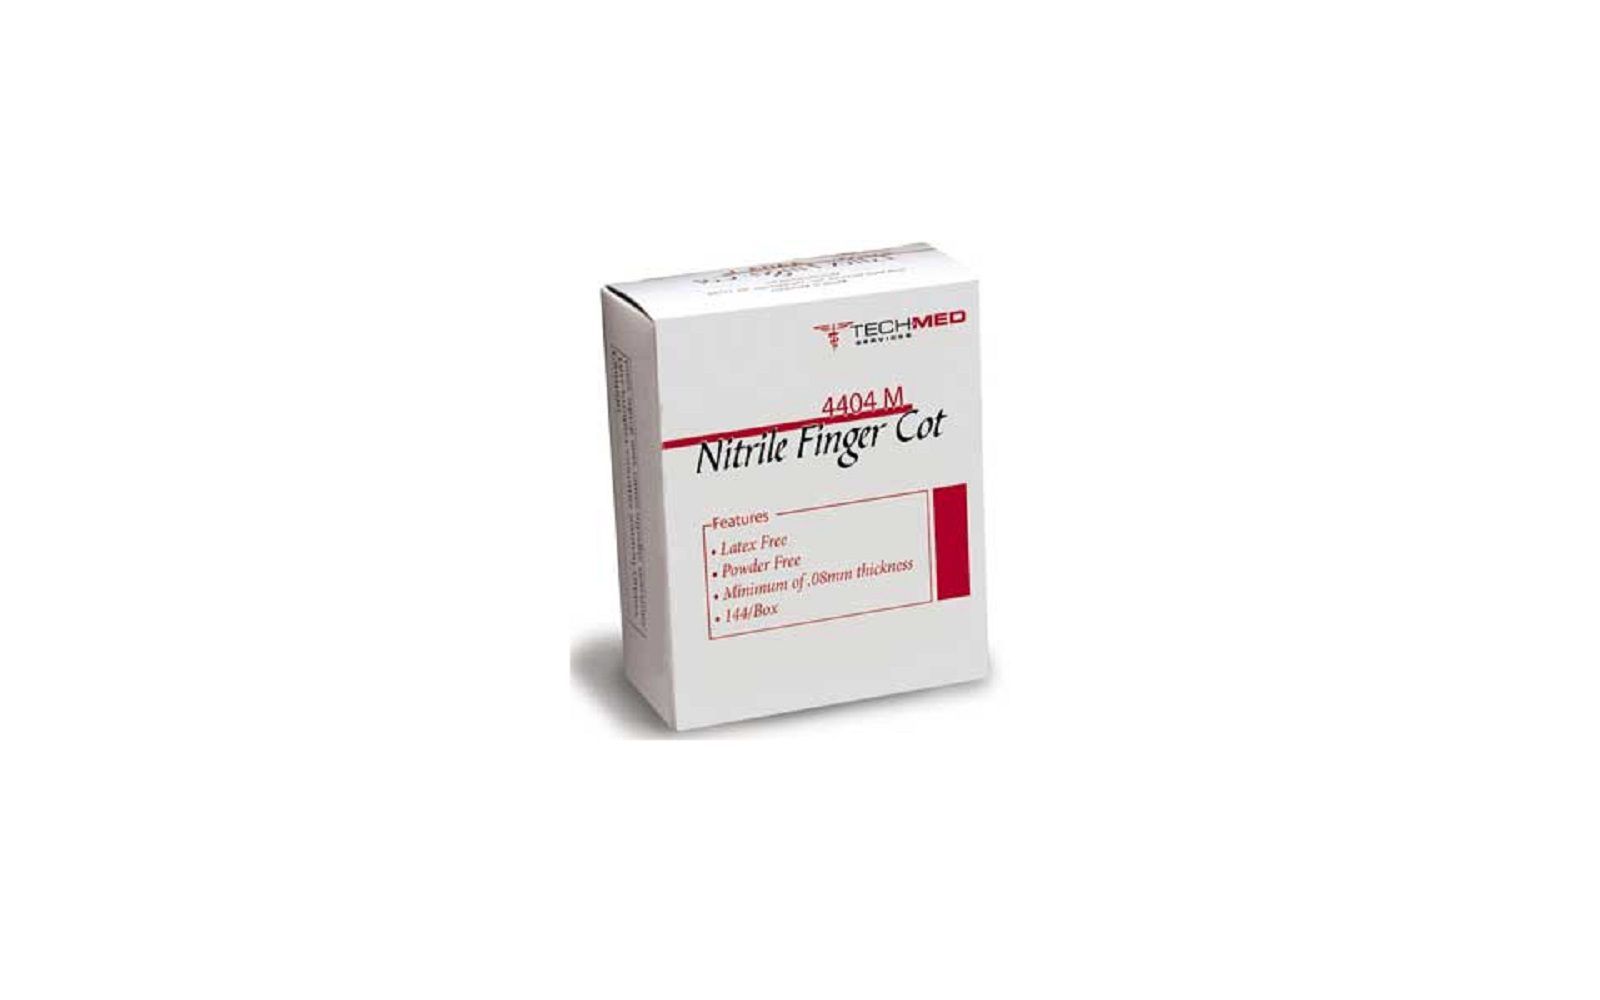 Tech-med services nitrile finger cots - large 144/bx. Latex-free and powder